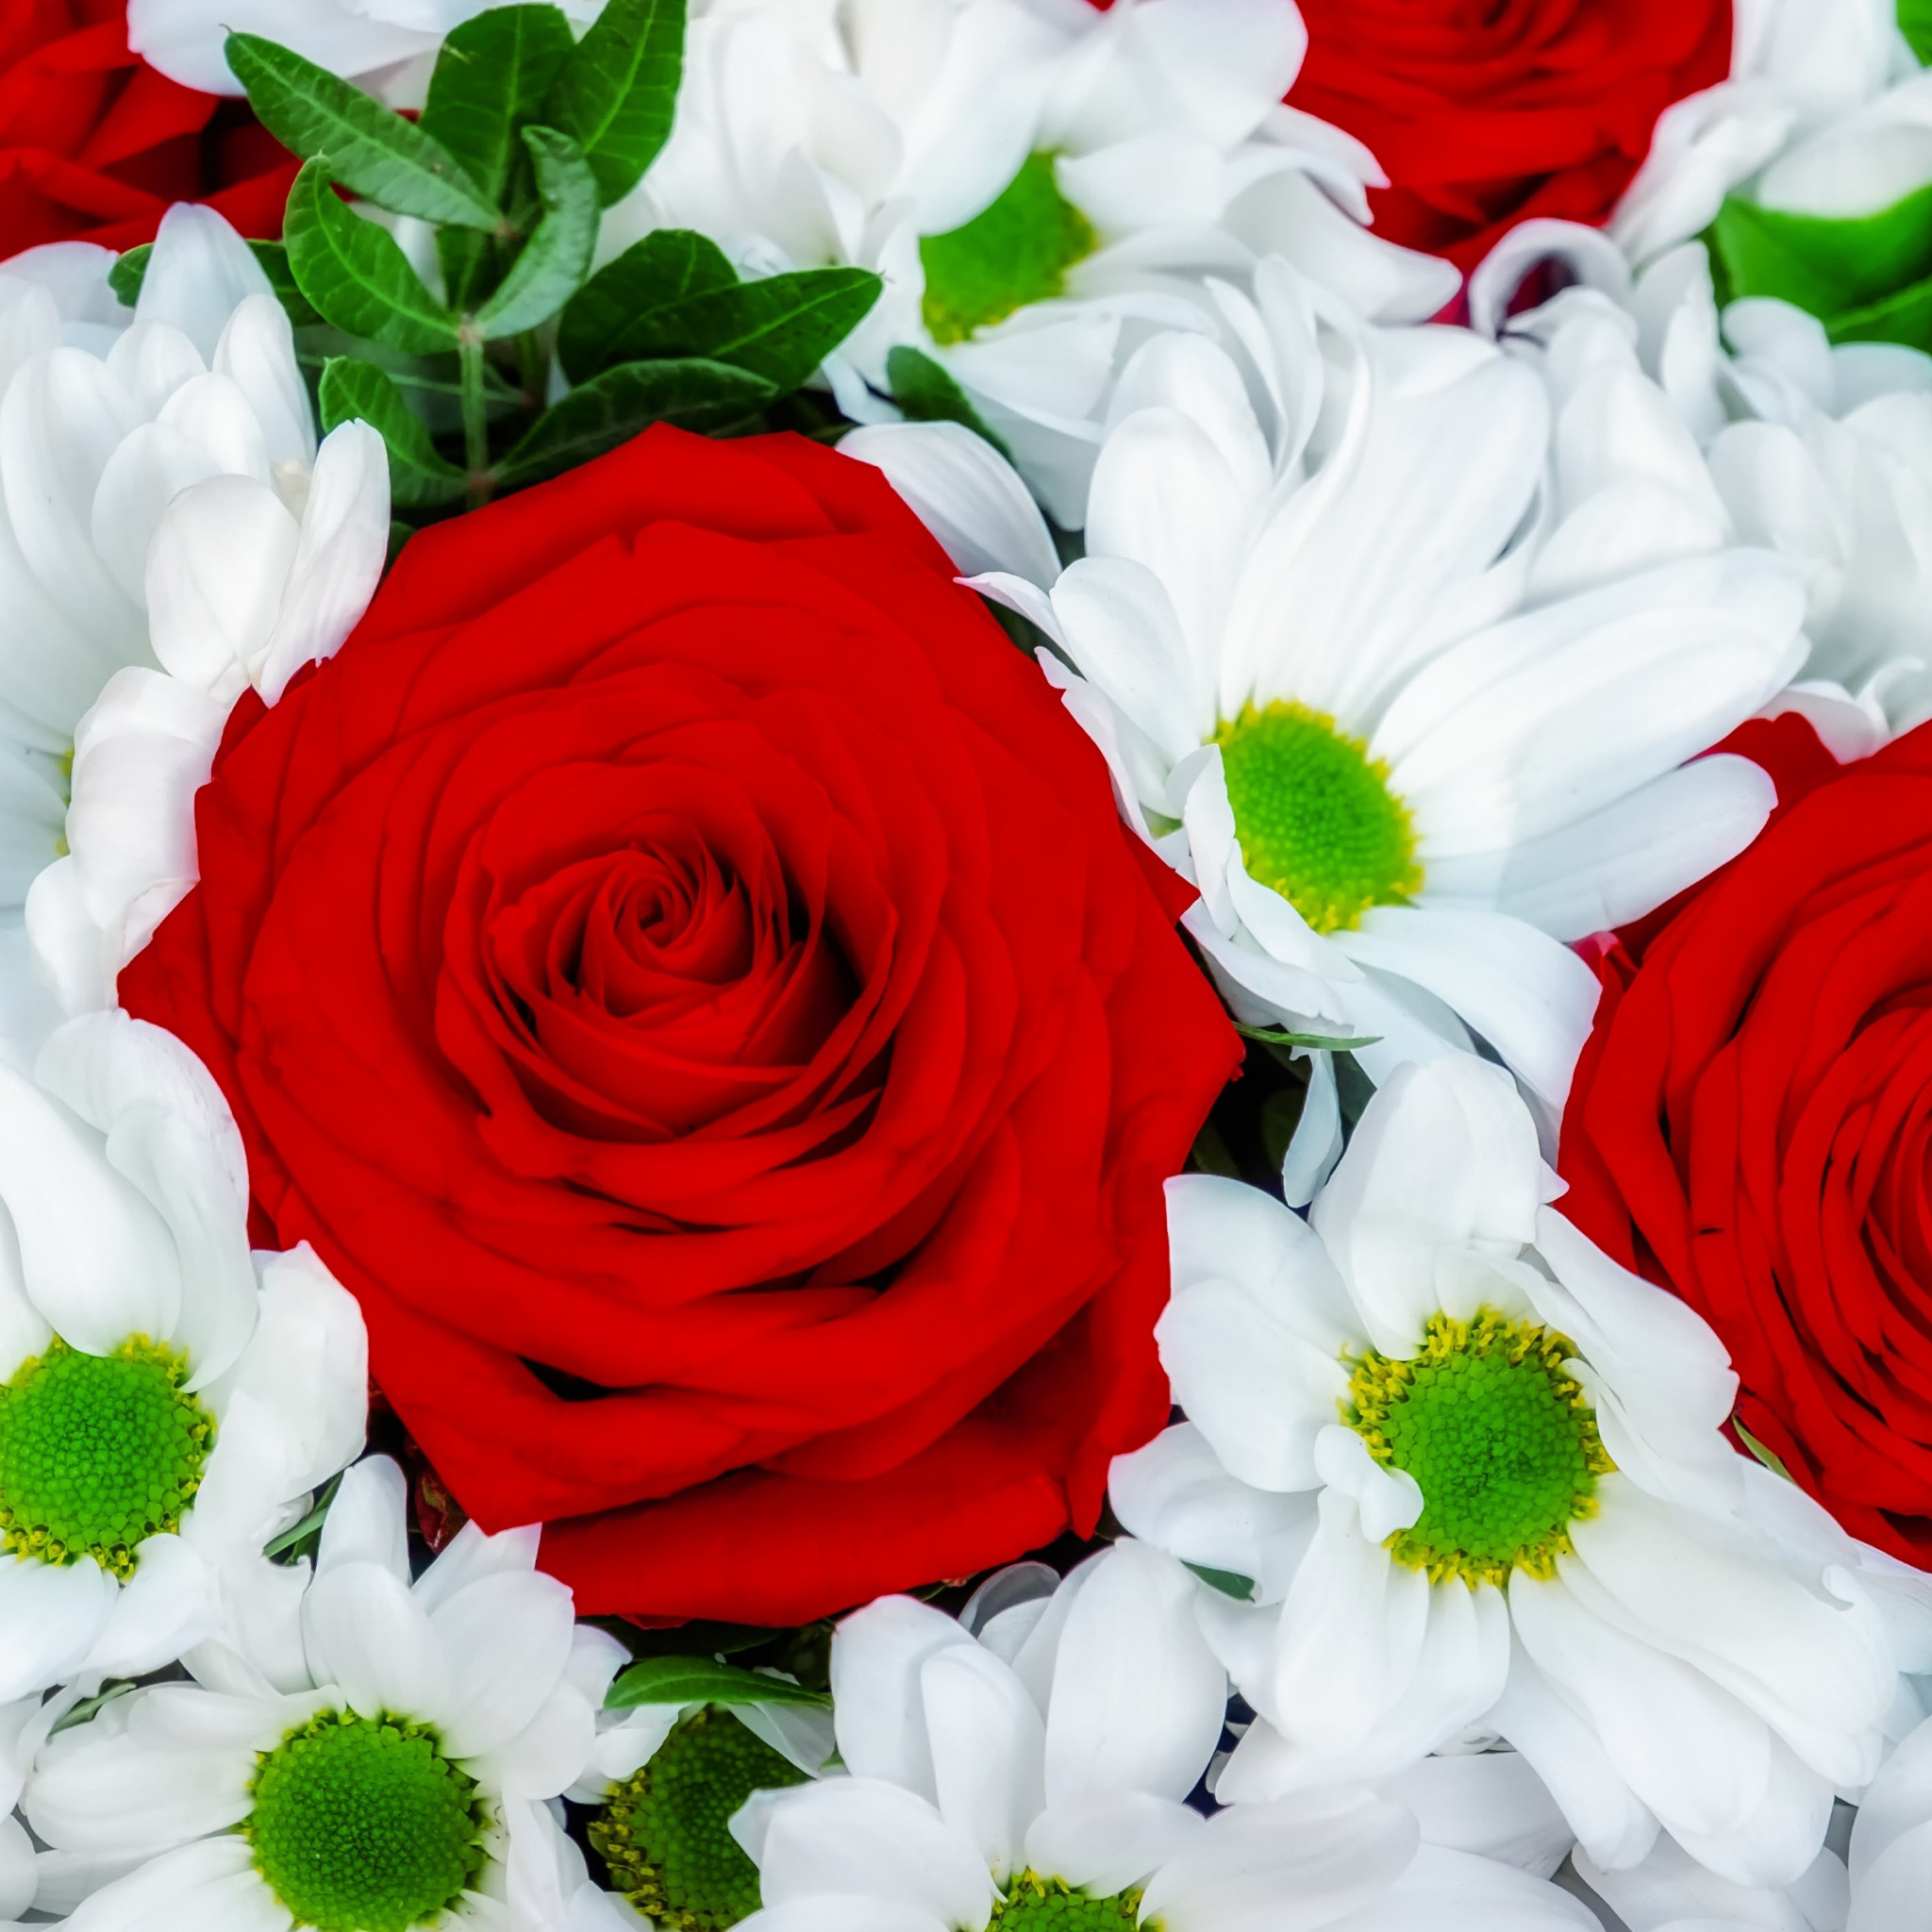 Roses and daisies bouquet wallpaper 2048x2048